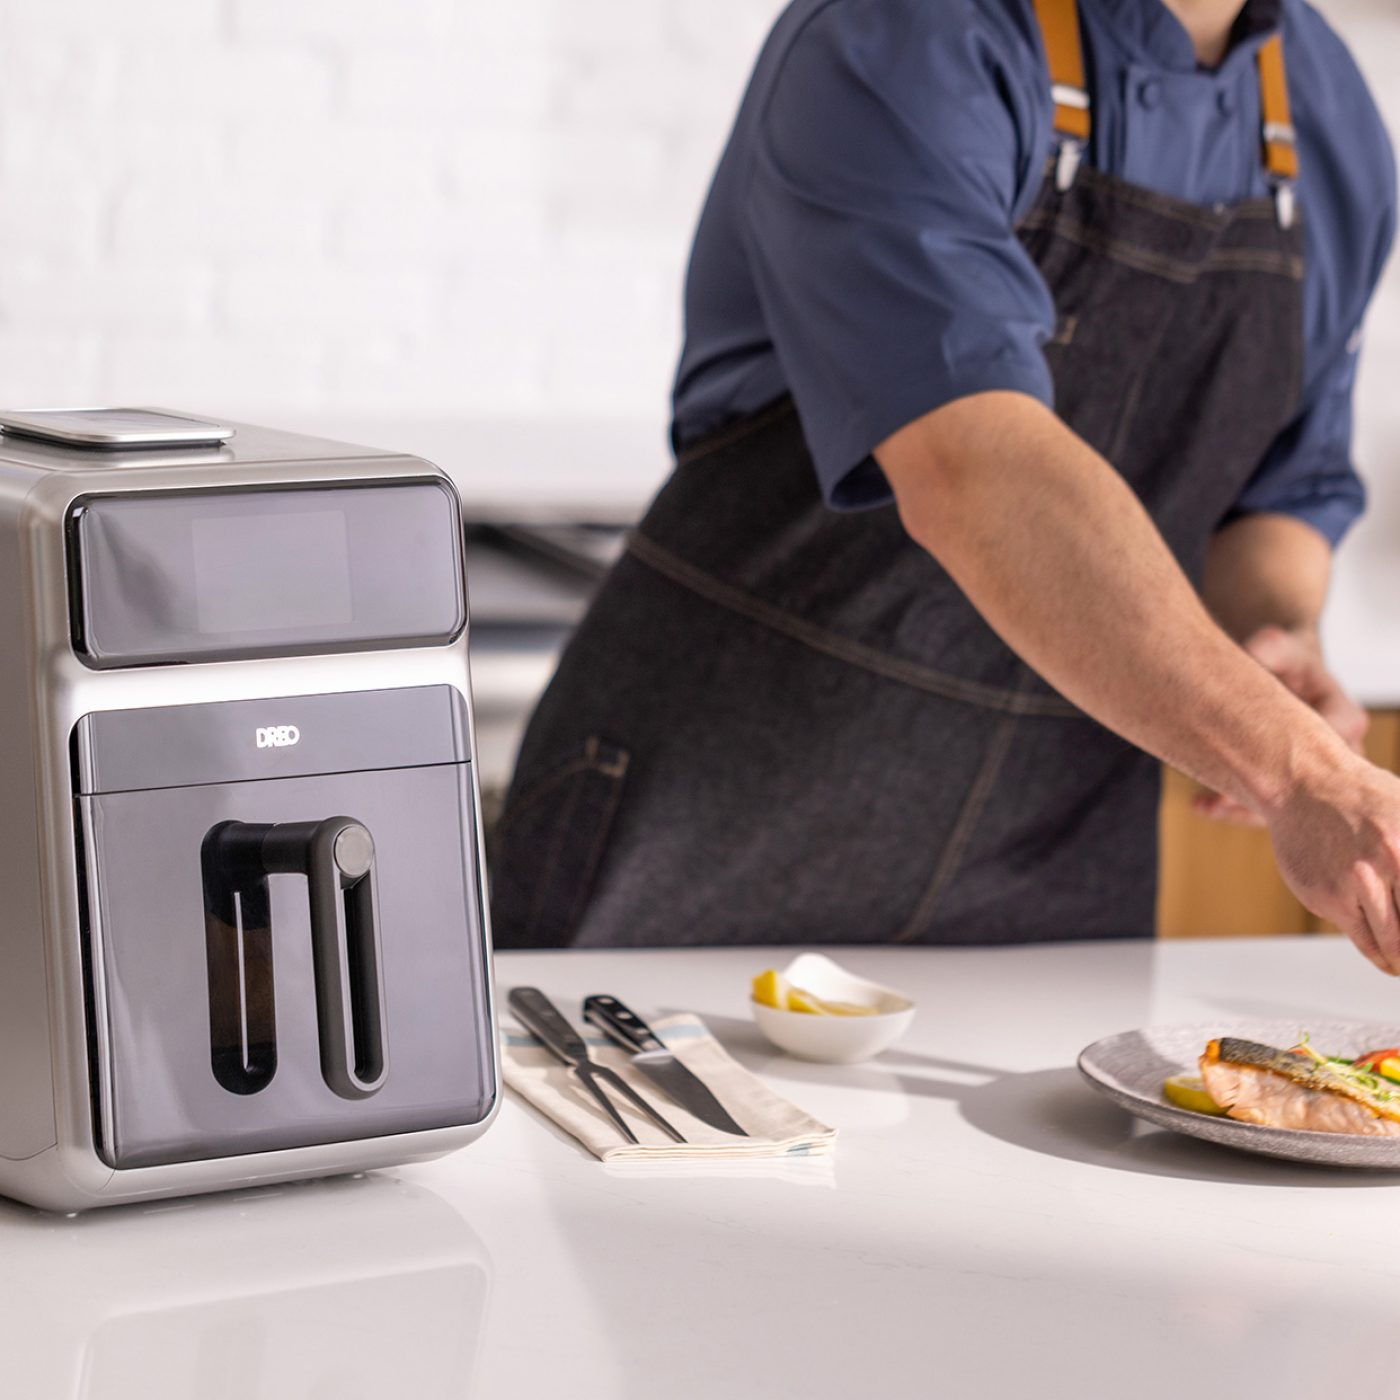 Dreo ChefMaker Combi innovative cooking will blow your mind